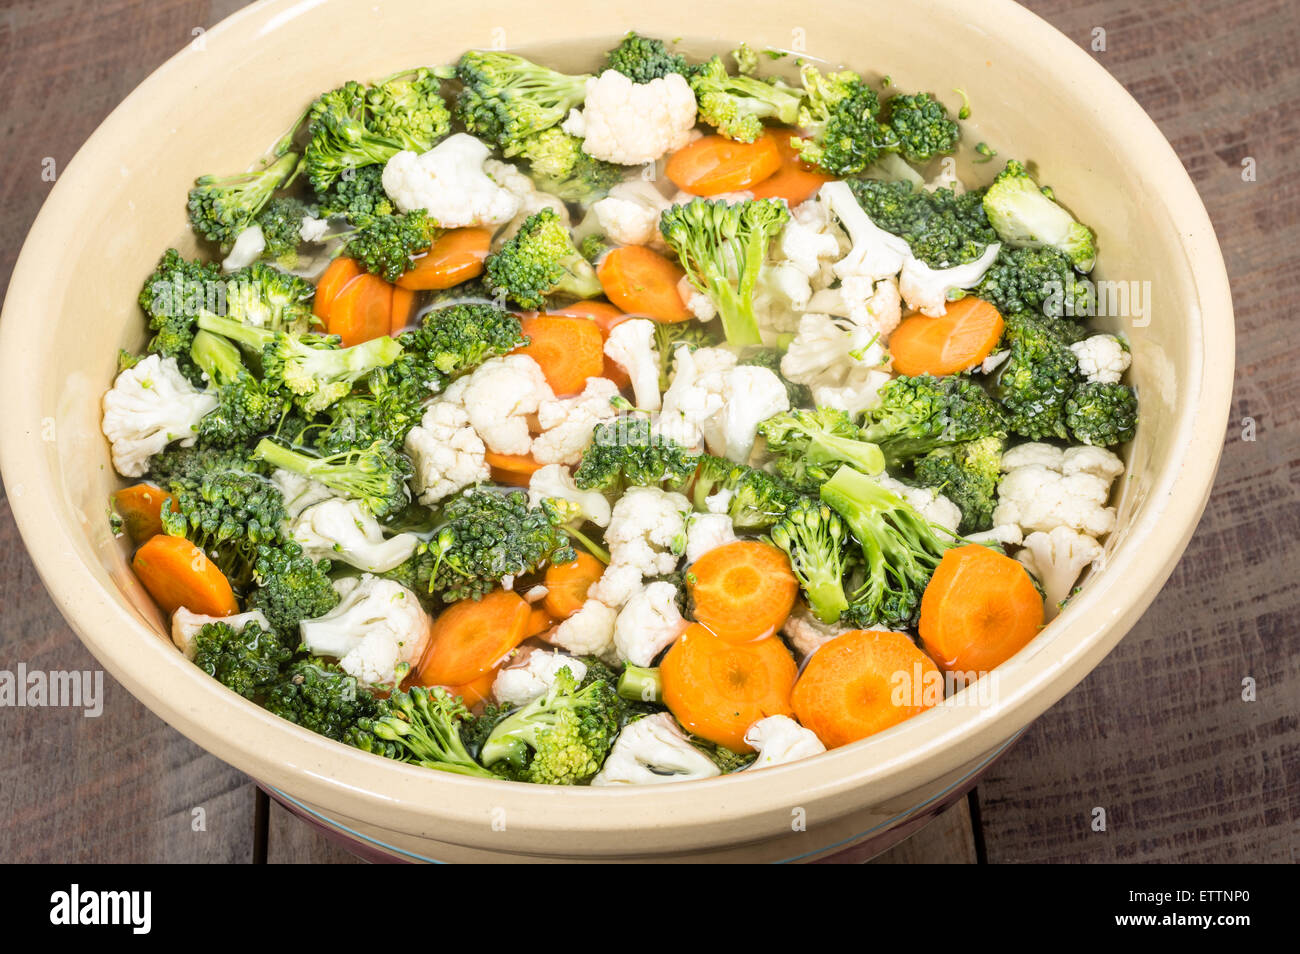 Bowl of fresh cut vegetables in brine for preserving Stock Photo